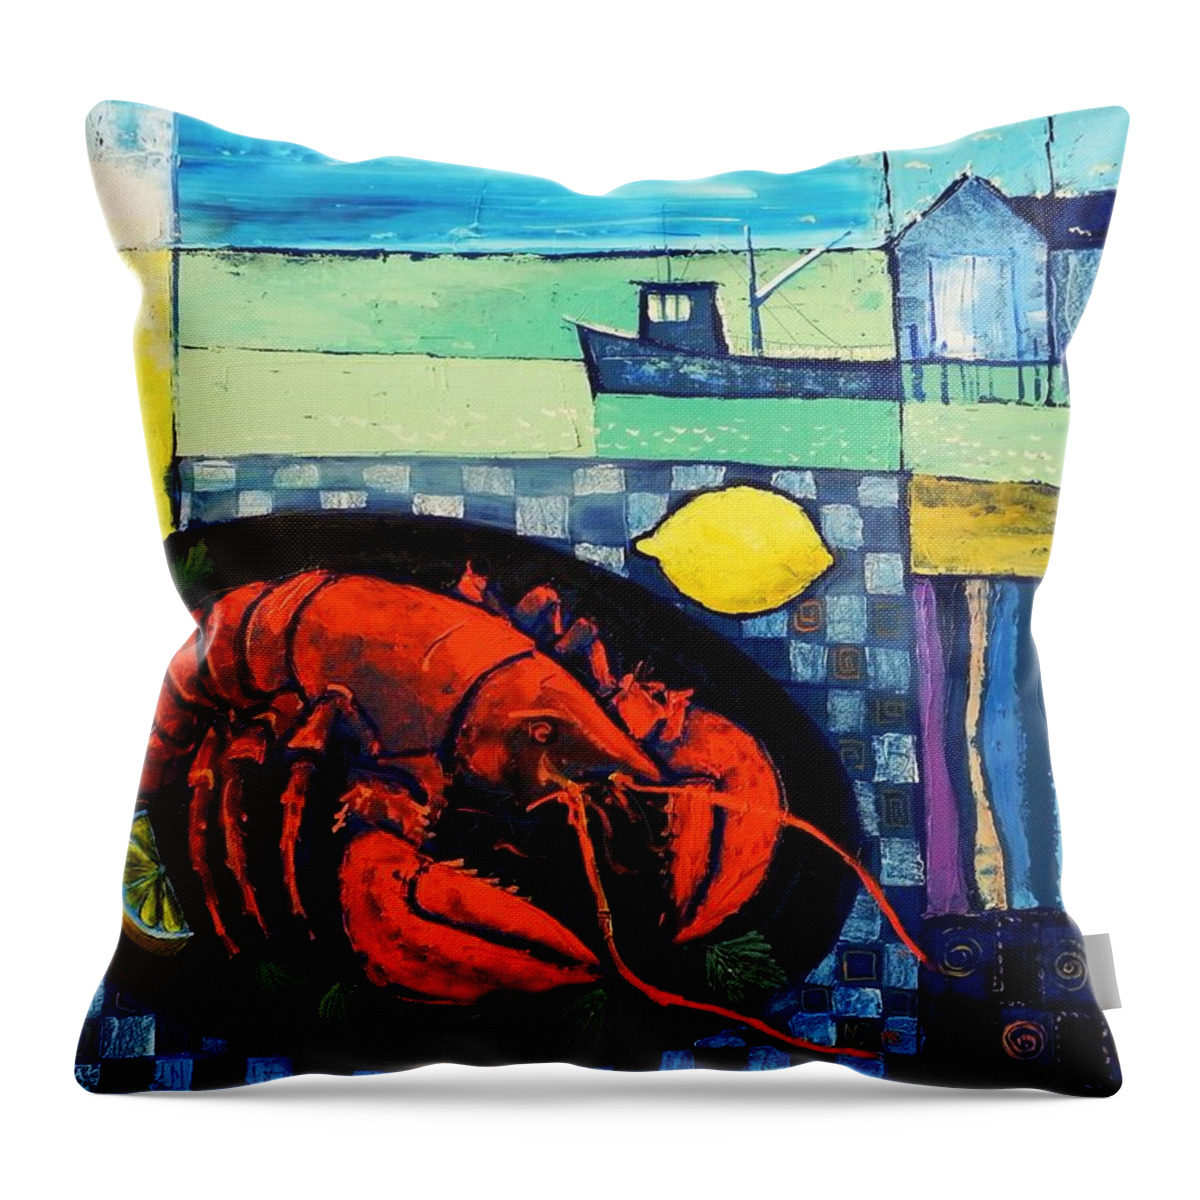  Throw Pillow featuring the painting Lobster by Mikhail Zarovny